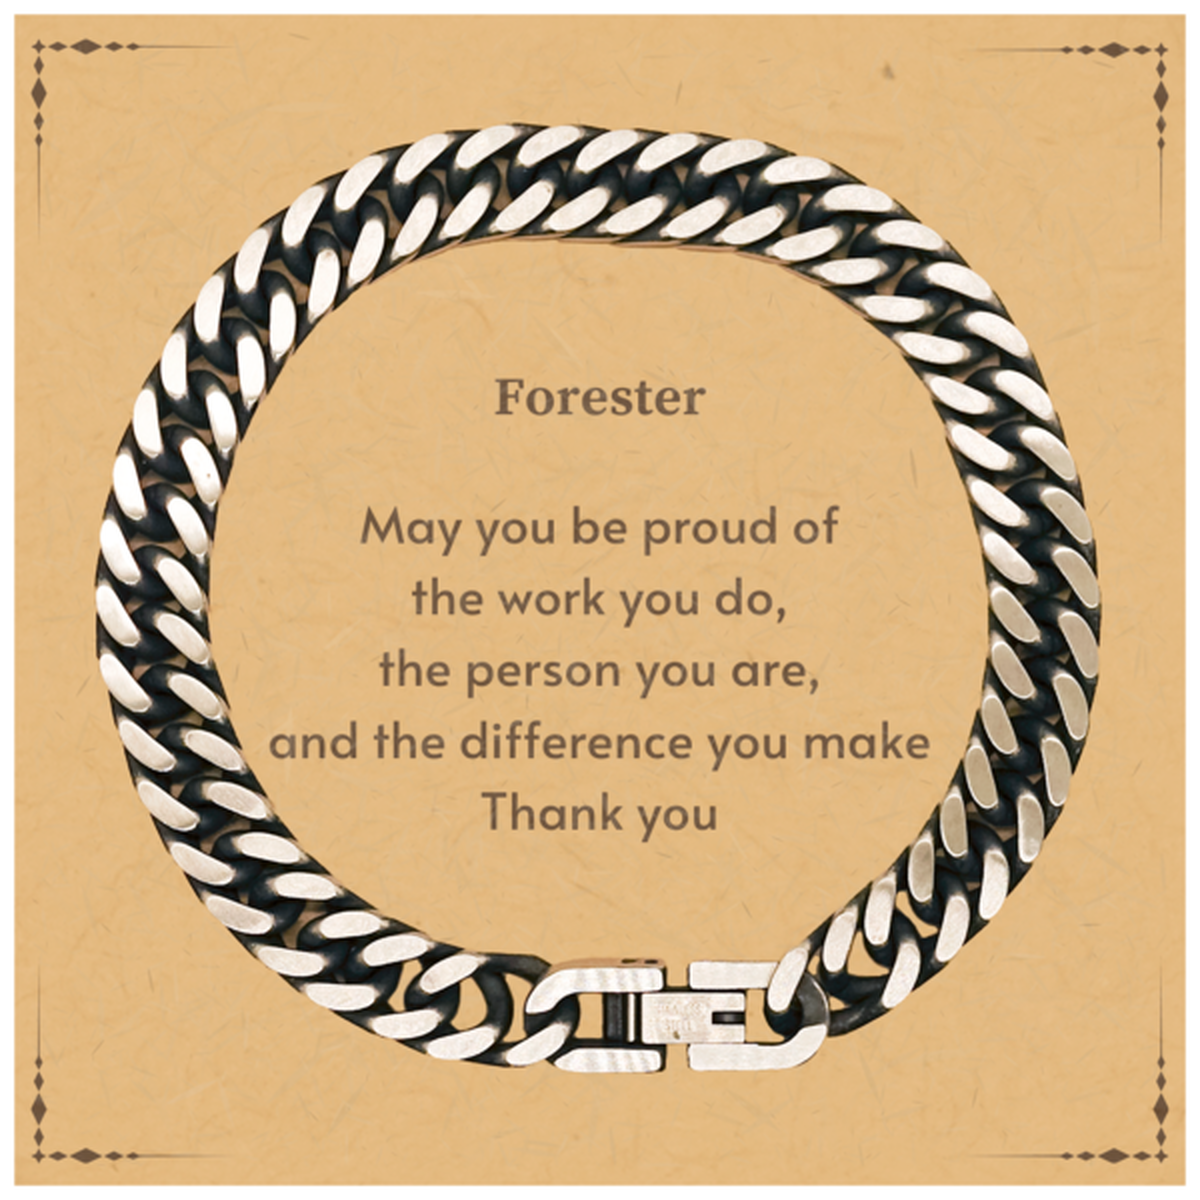 Heartwarming Cuban Link Chain Bracelet Retirement Coworkers Gifts for Forester, Forester May You be proud of the work you do, the person you are Gifts for Boss Men Women Friends